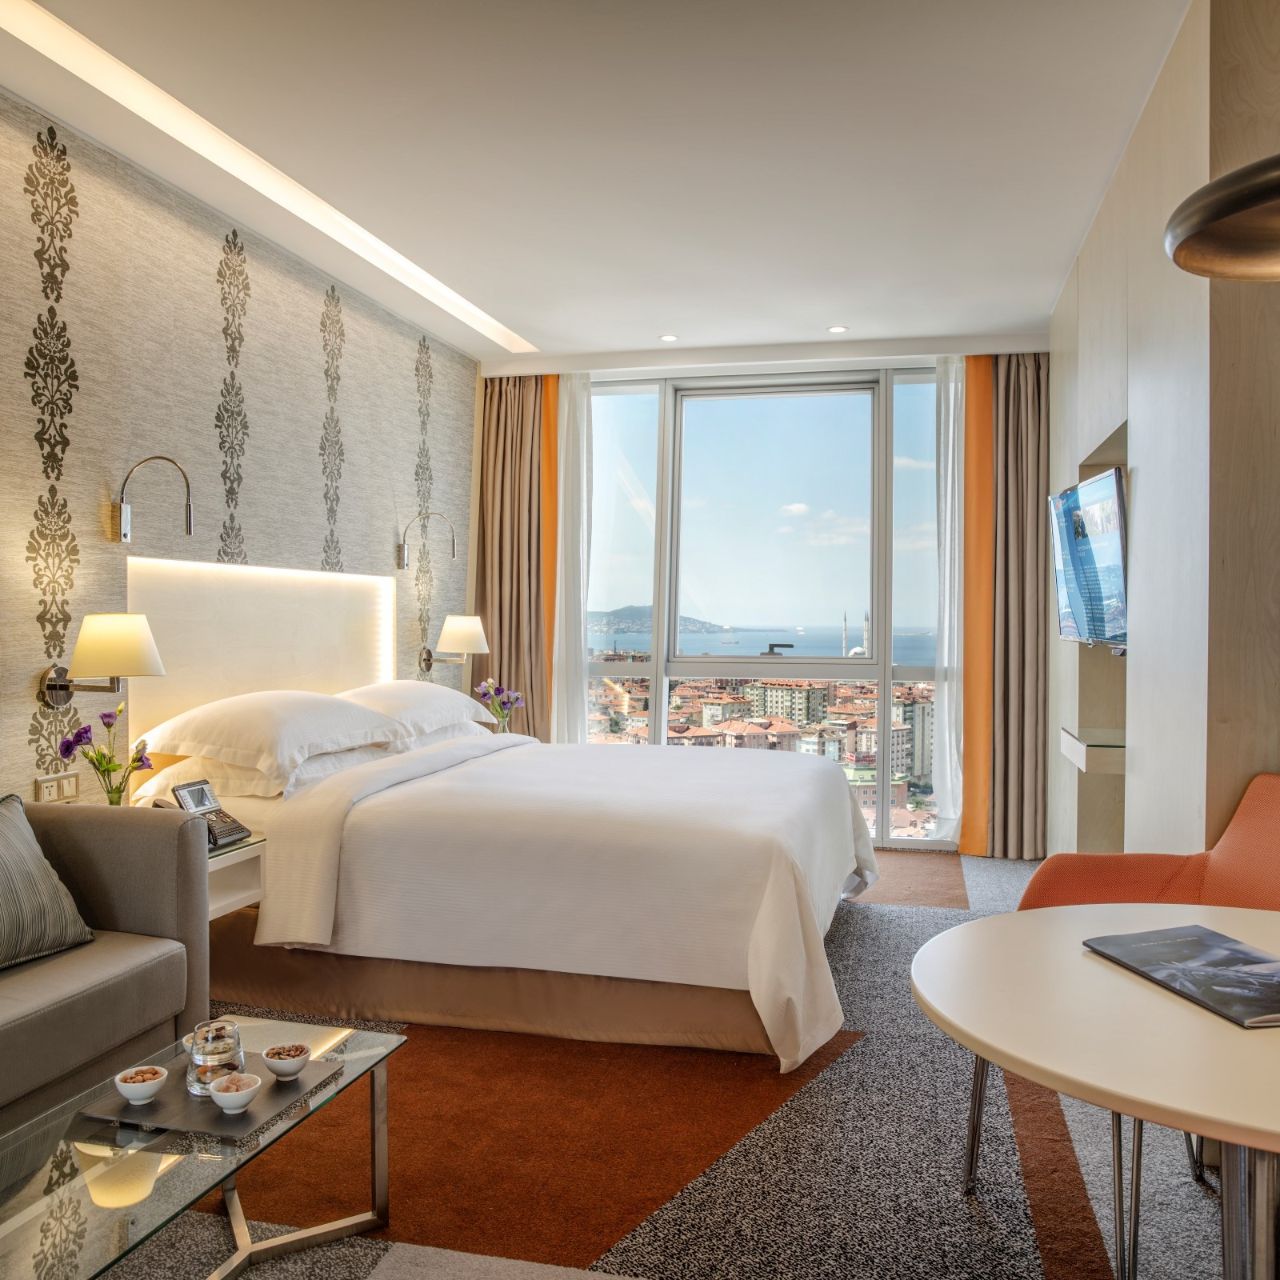 Hotel Burgu Arjaan by Rotana - Istanbul - Great prices at HOTEL INFO